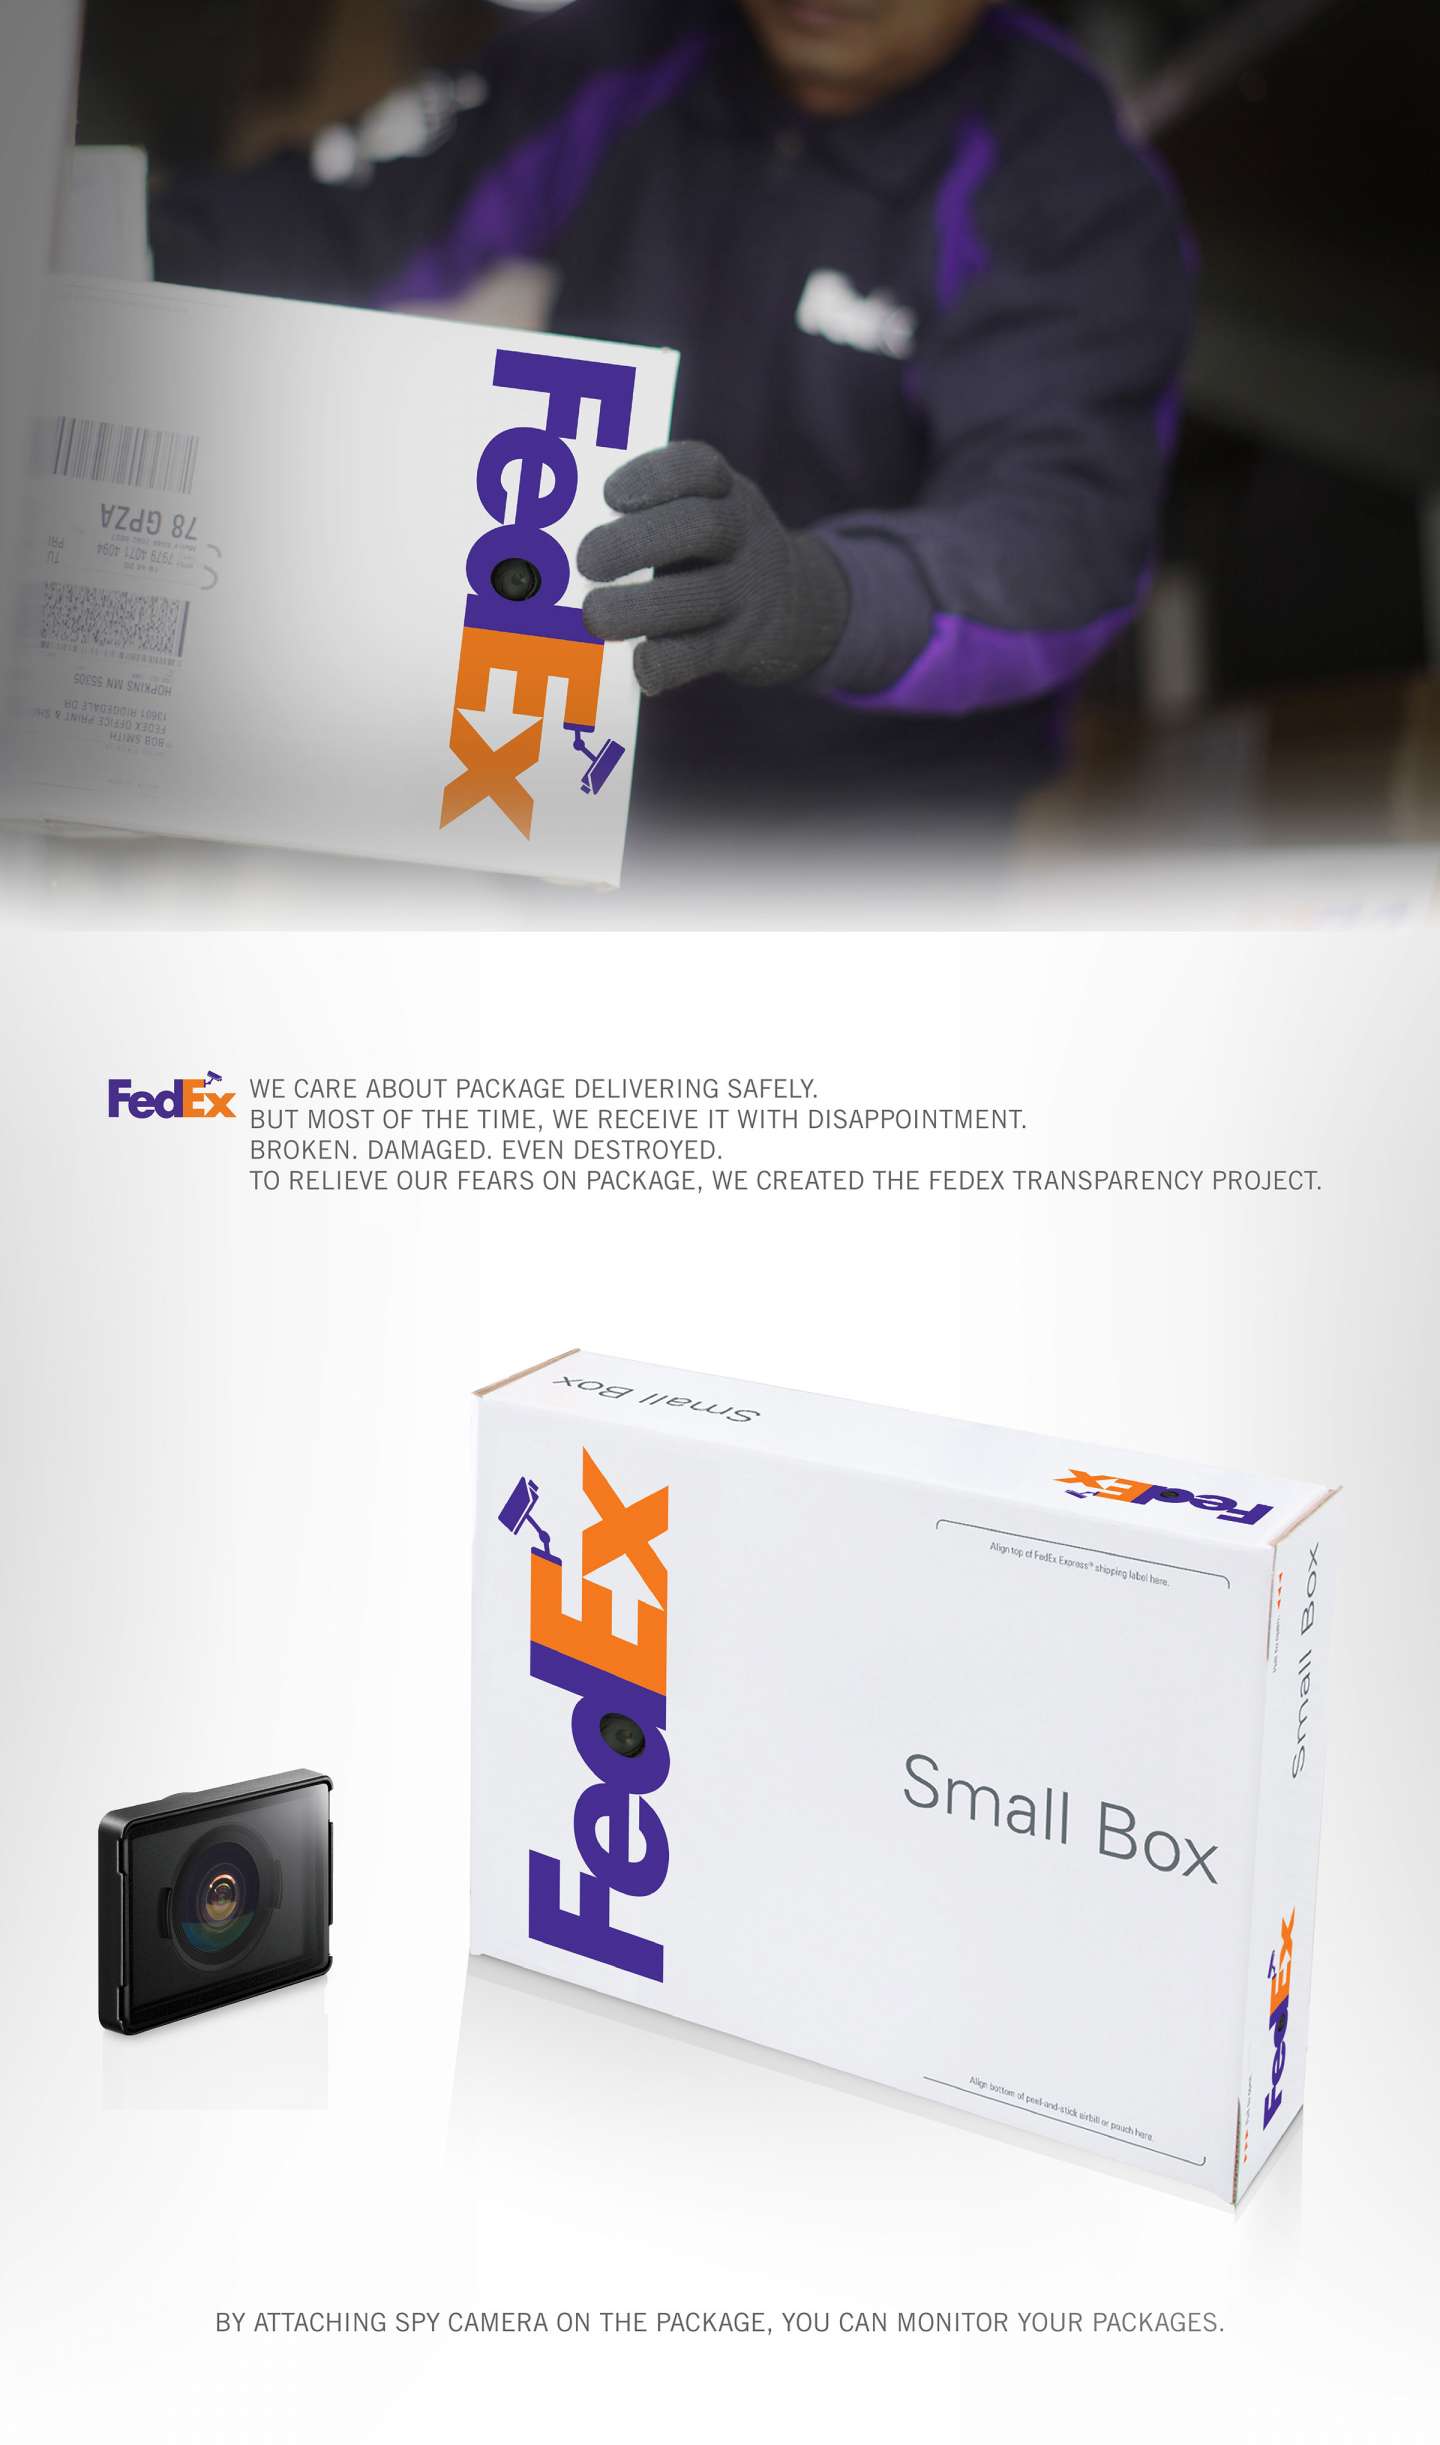 The Fedex Transparency Project